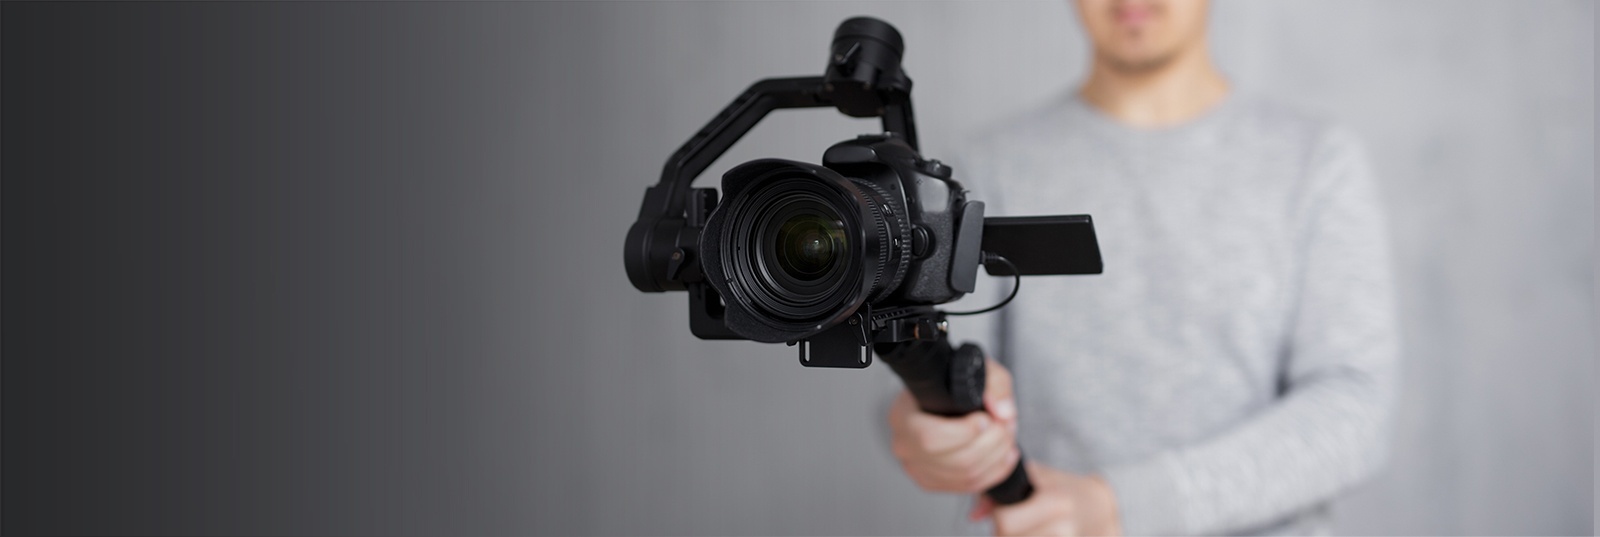 Transform your business with Video and Media Production Services from Chromatin Productions in Troy, Michigan